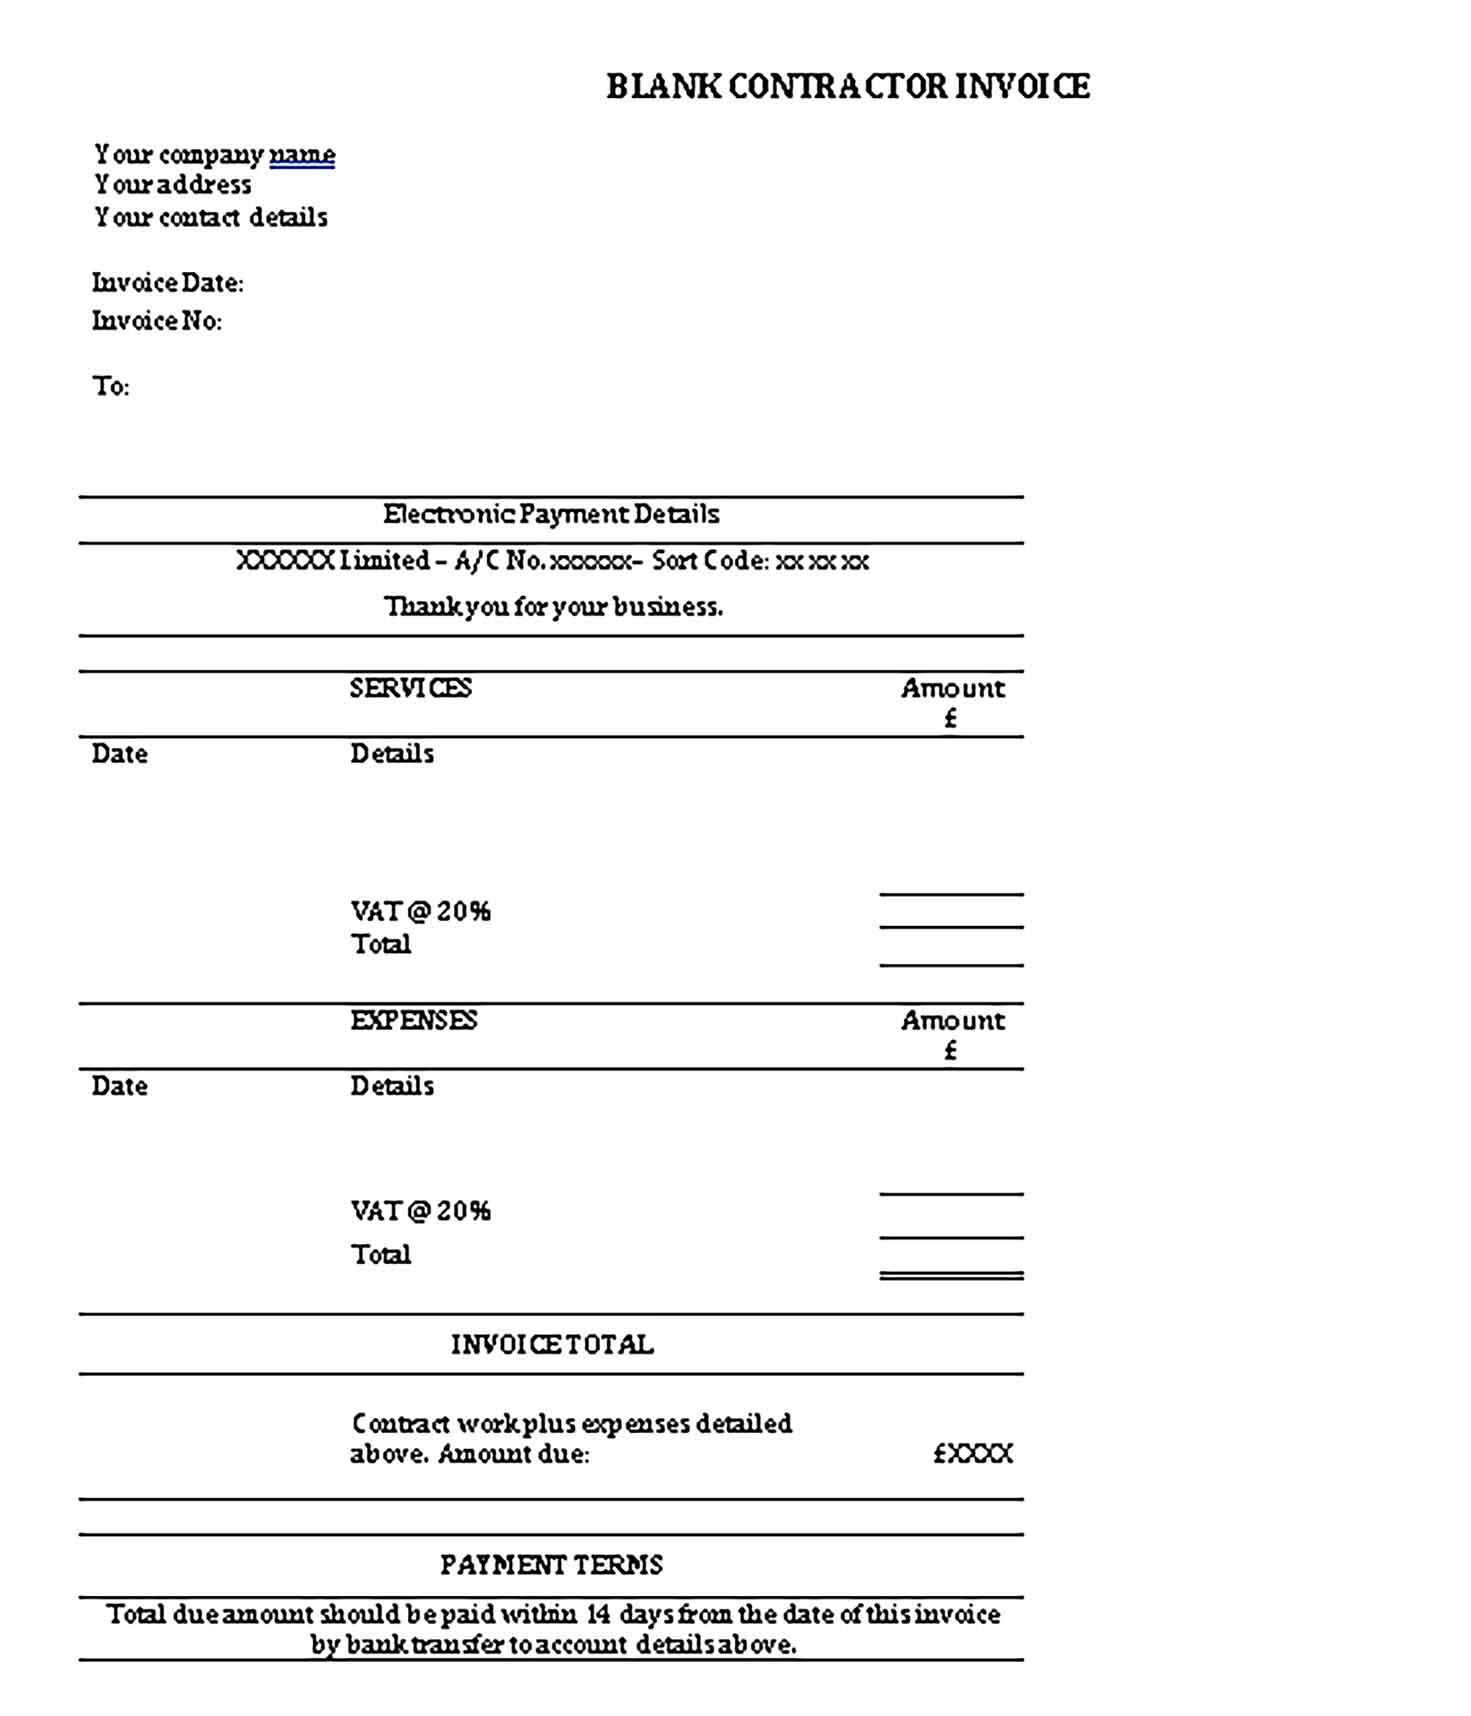 Sample Templates Blank Contractor Invoice